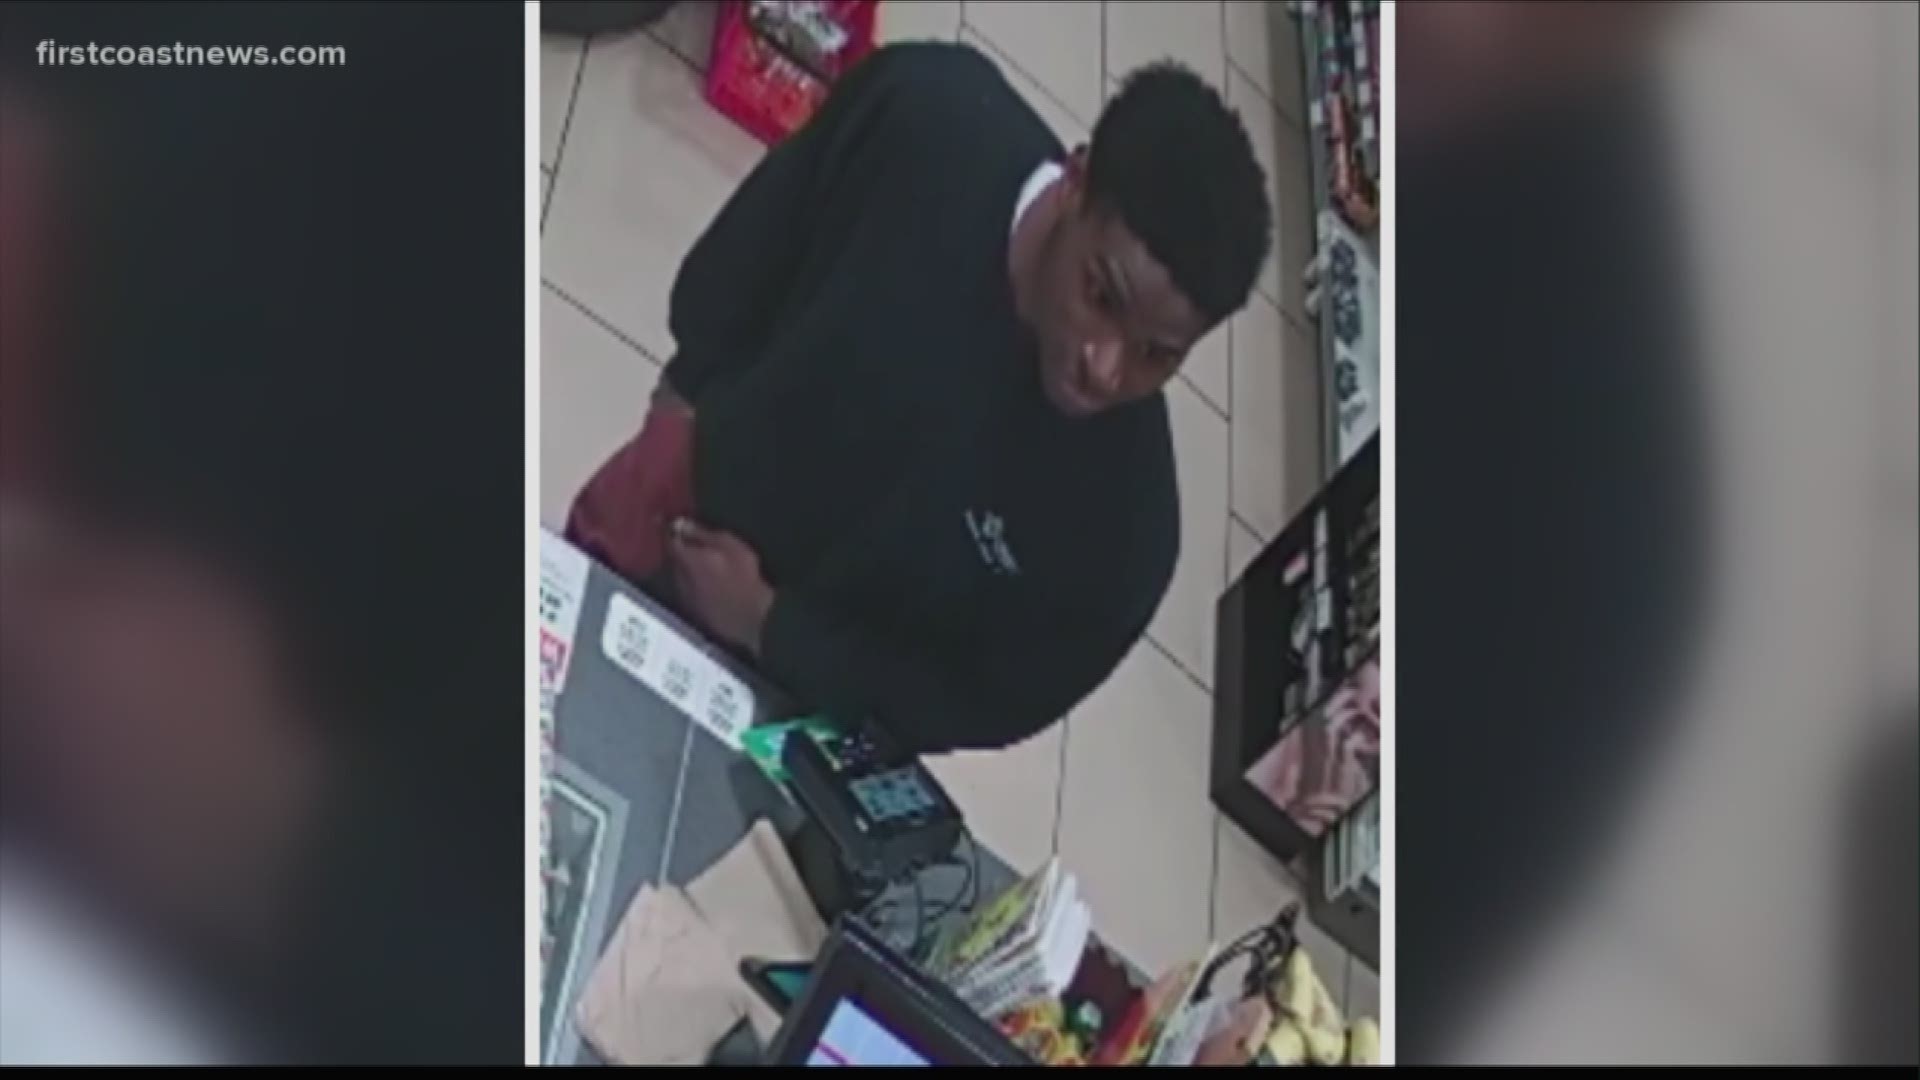 The pictured man is said to have entered a 7-Eleven store located in the 900 block of Margaret Street. He then demanded money from the clerk, police said.